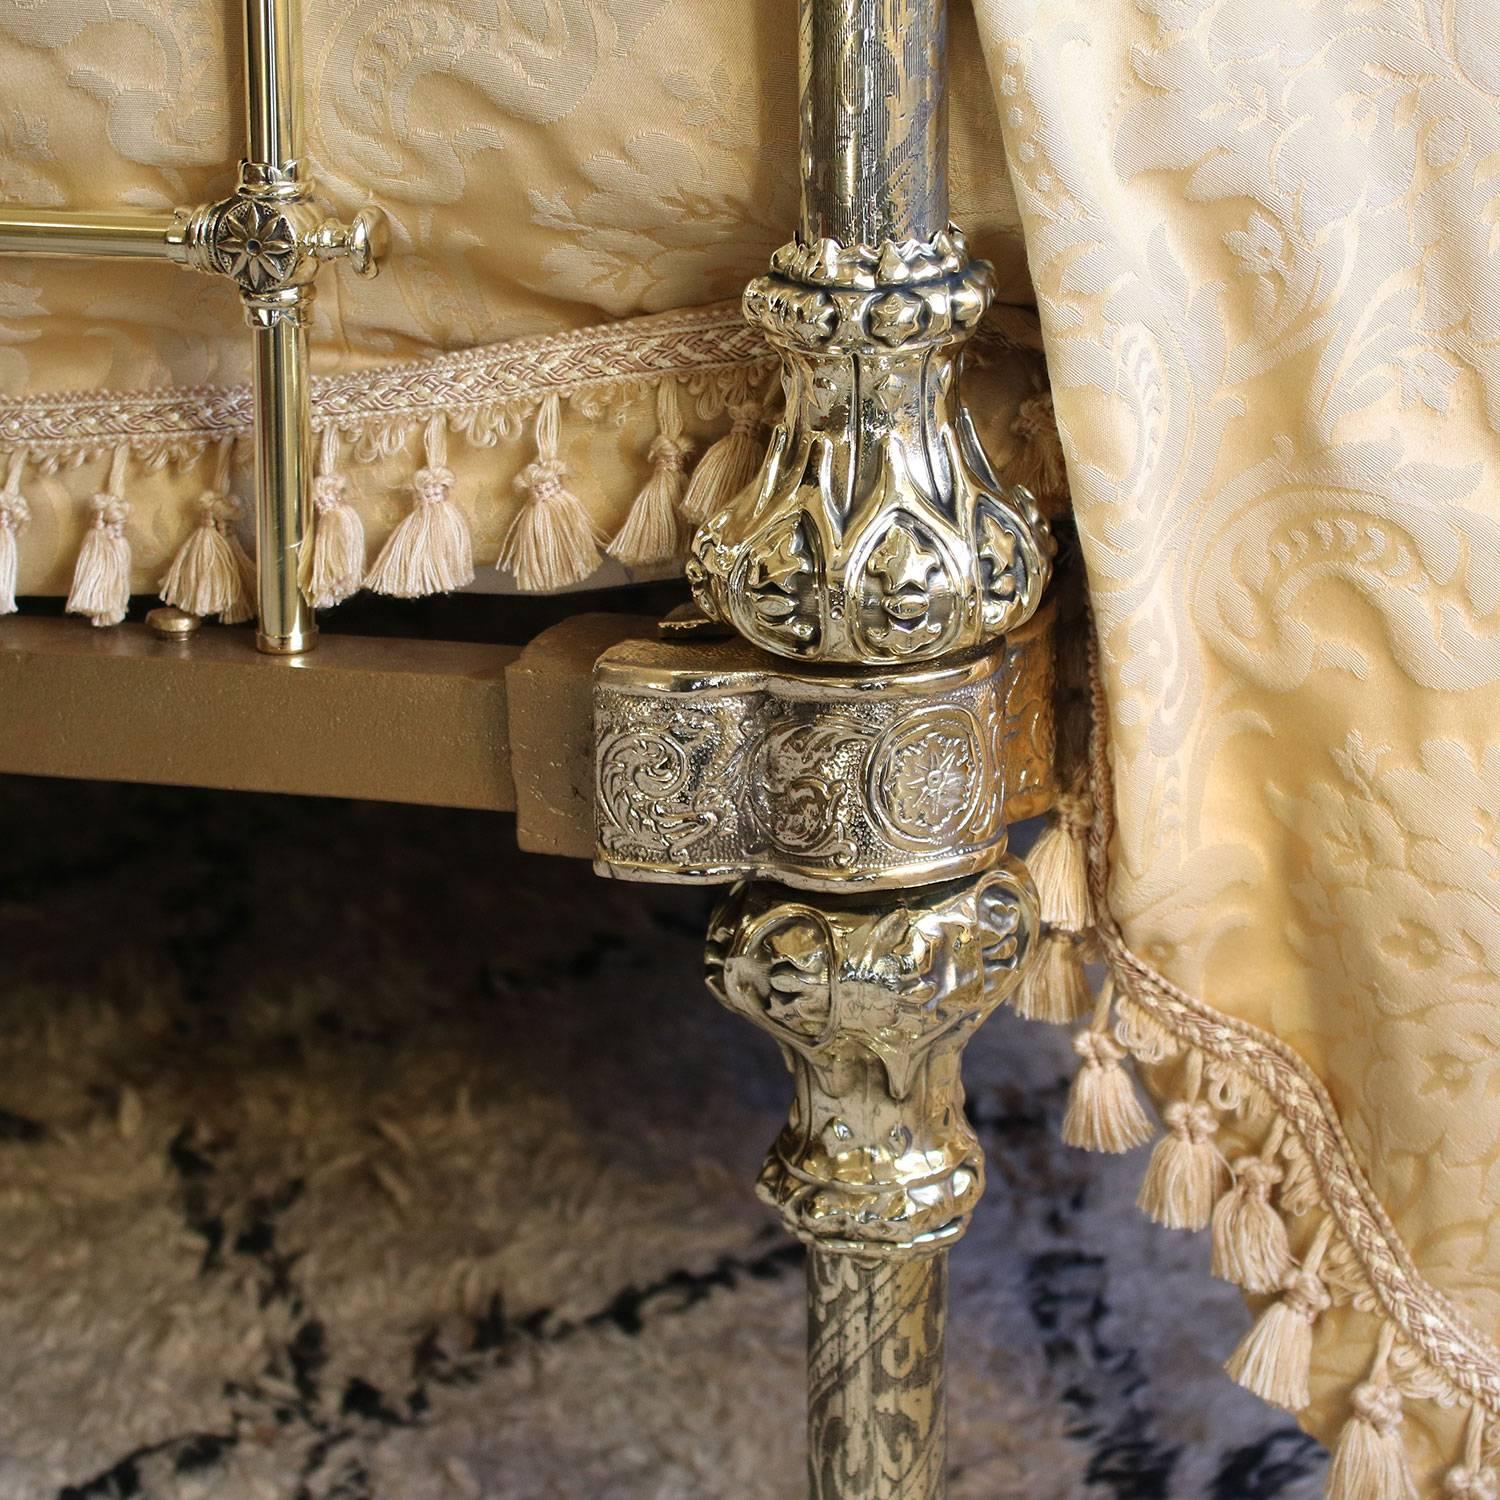 19th Century Wide Brass Four Poster Bed with Song Bird Castings and Crown, M4P25